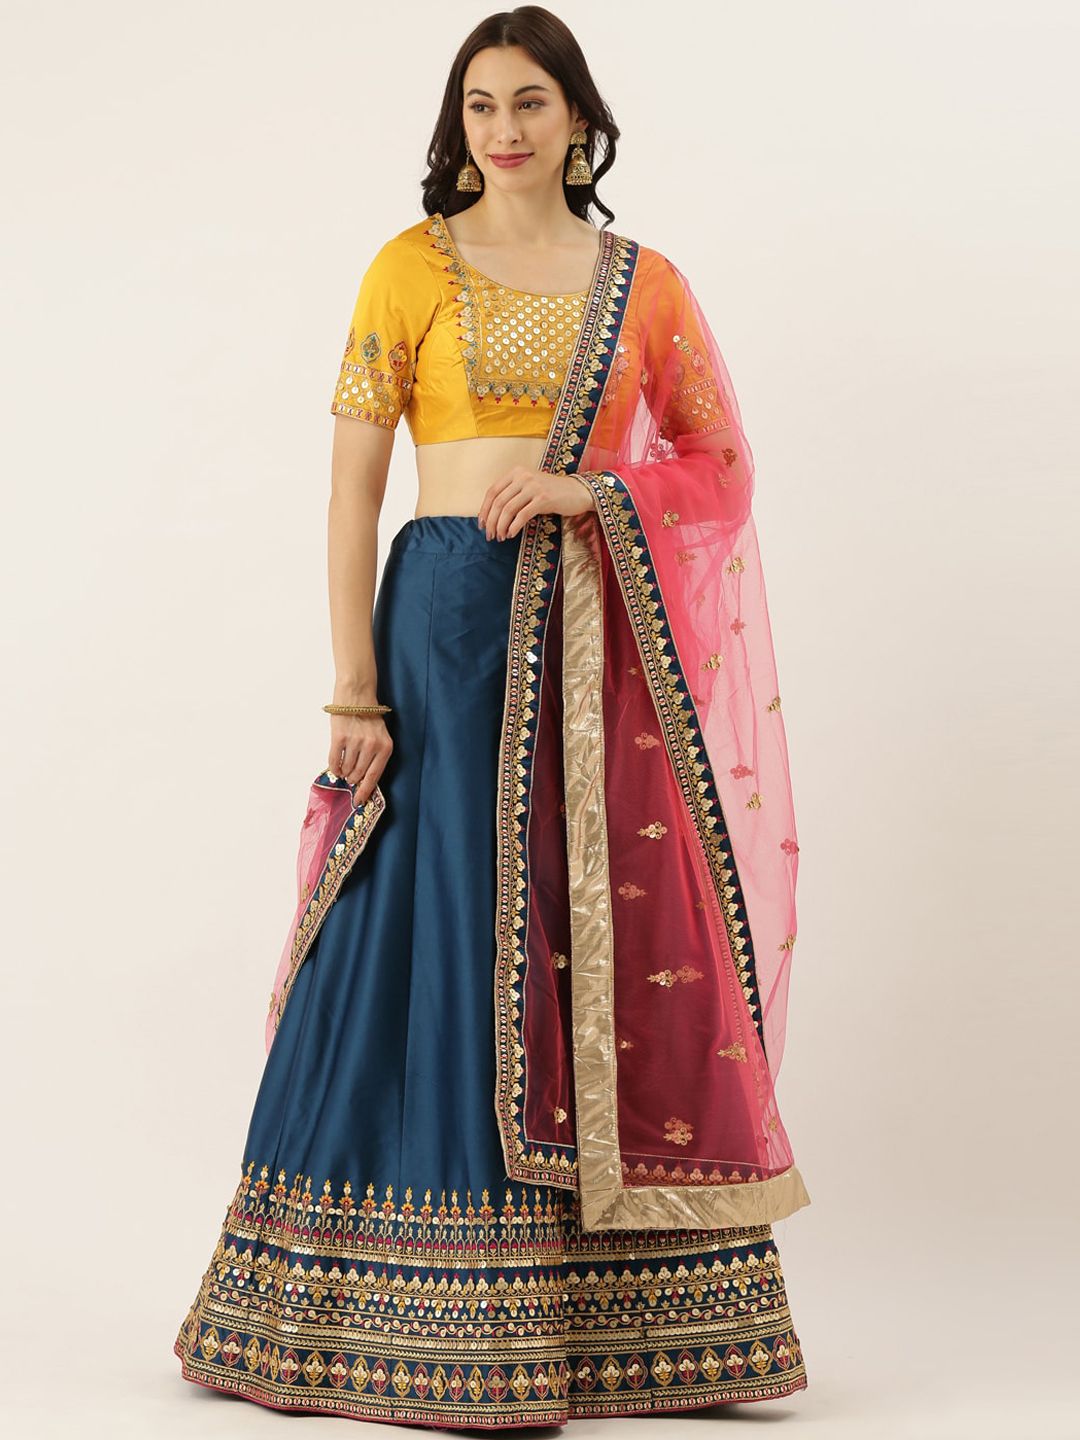 panchhi Navy Blue & Yellow Embellished Semi-Stitched Lehenga & Unstitched Blouse with Dupatta Price in India